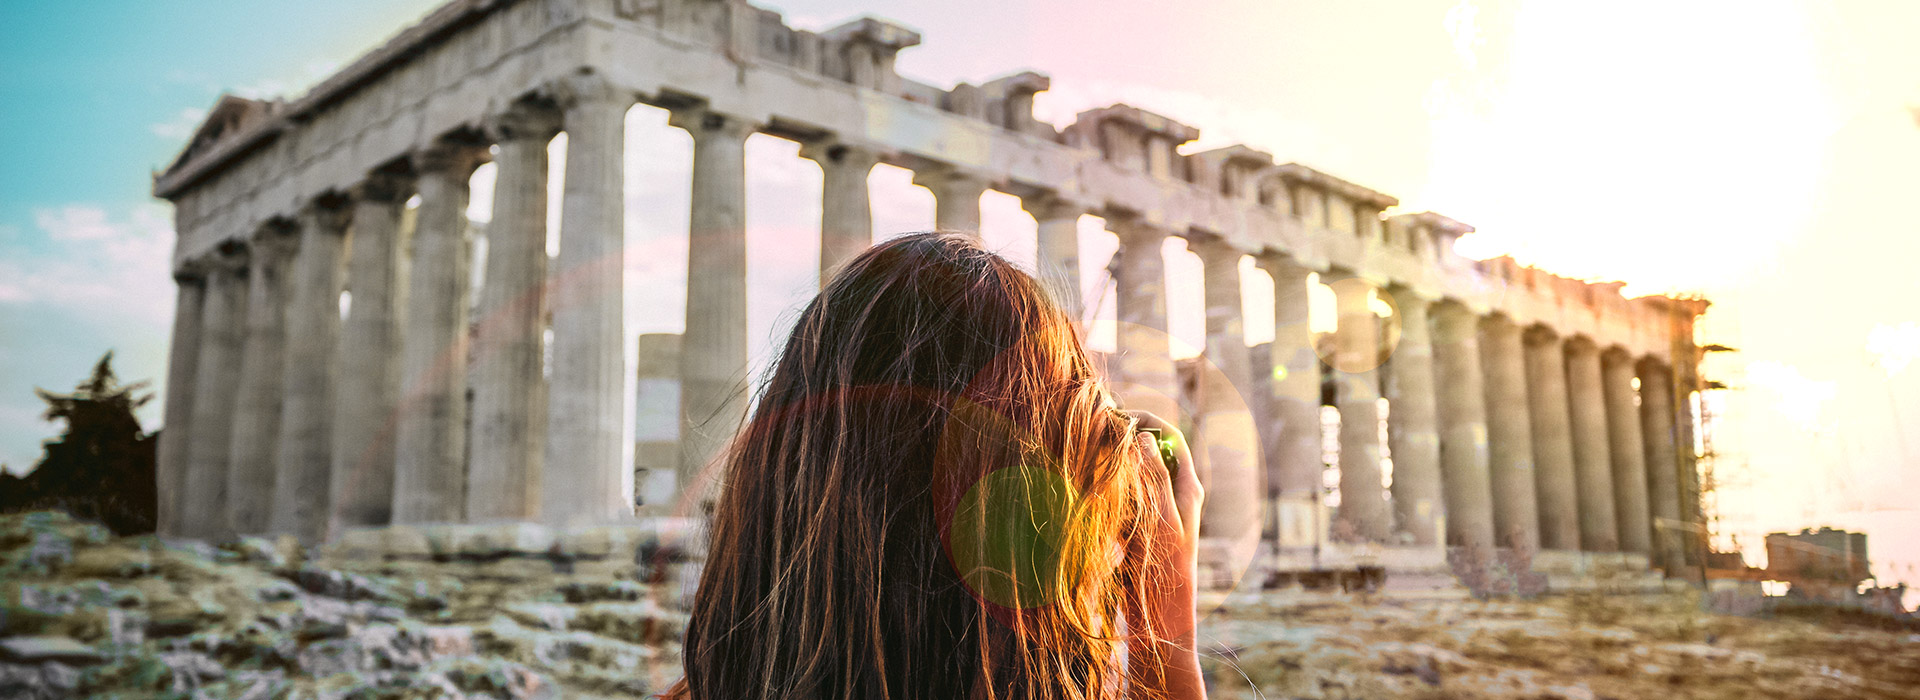 Photo taken behind the head of a woman taking a camera photo of the Parthenon in Greece